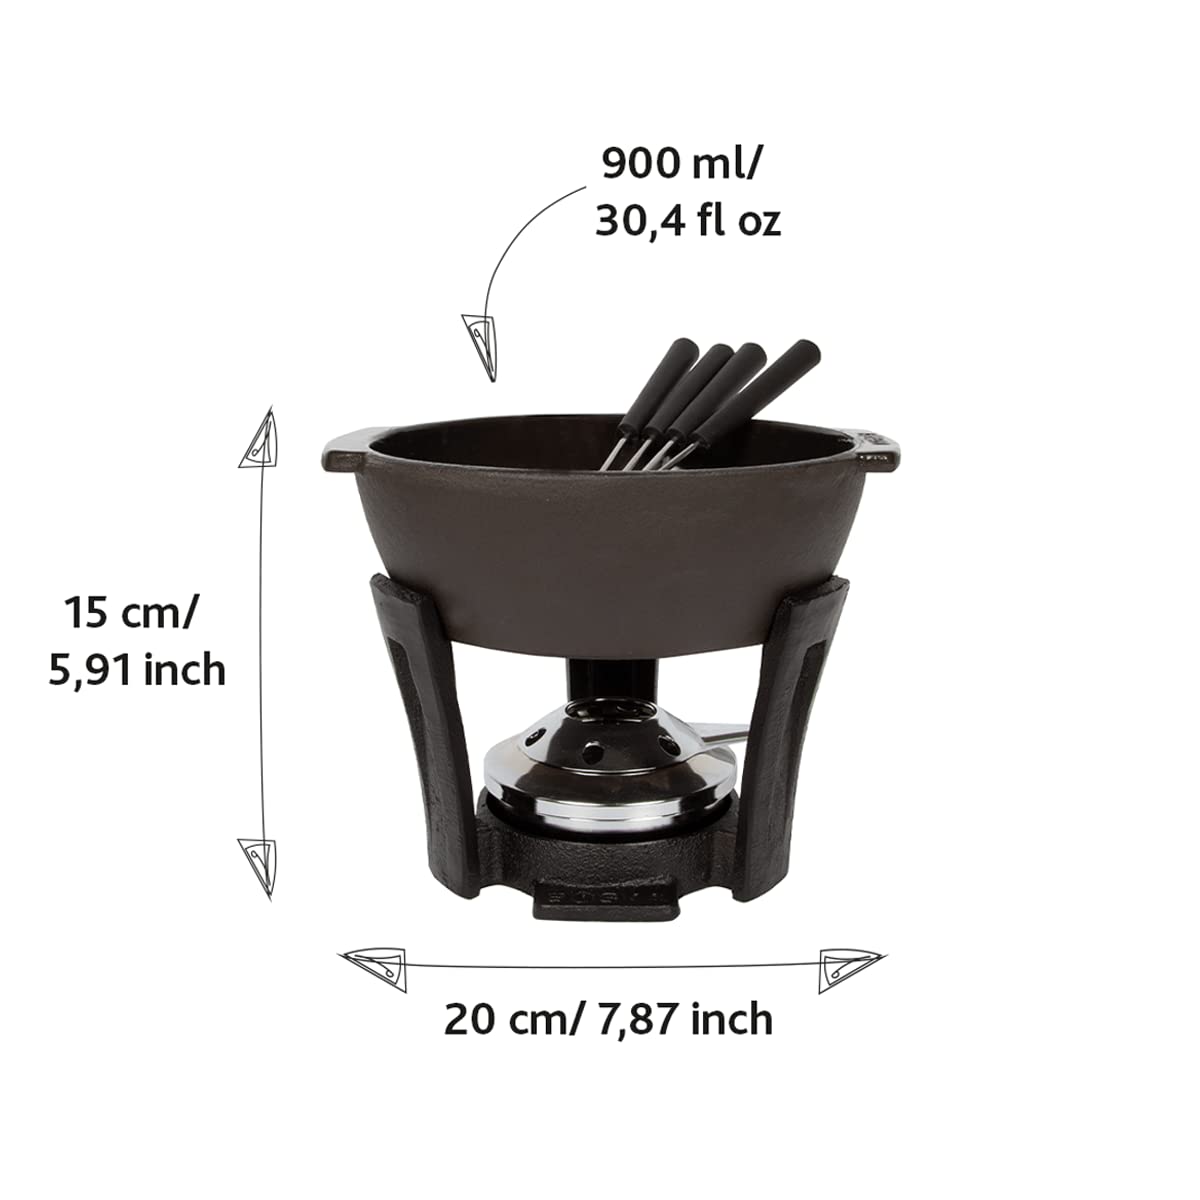 Boska Cheese Fondue Party Set - Black Cast Iron Fondue Pot for Cheese, Meat, and Chocolate - Suitable for Every Stove - Wedding Registry Items for up to 4 Persons